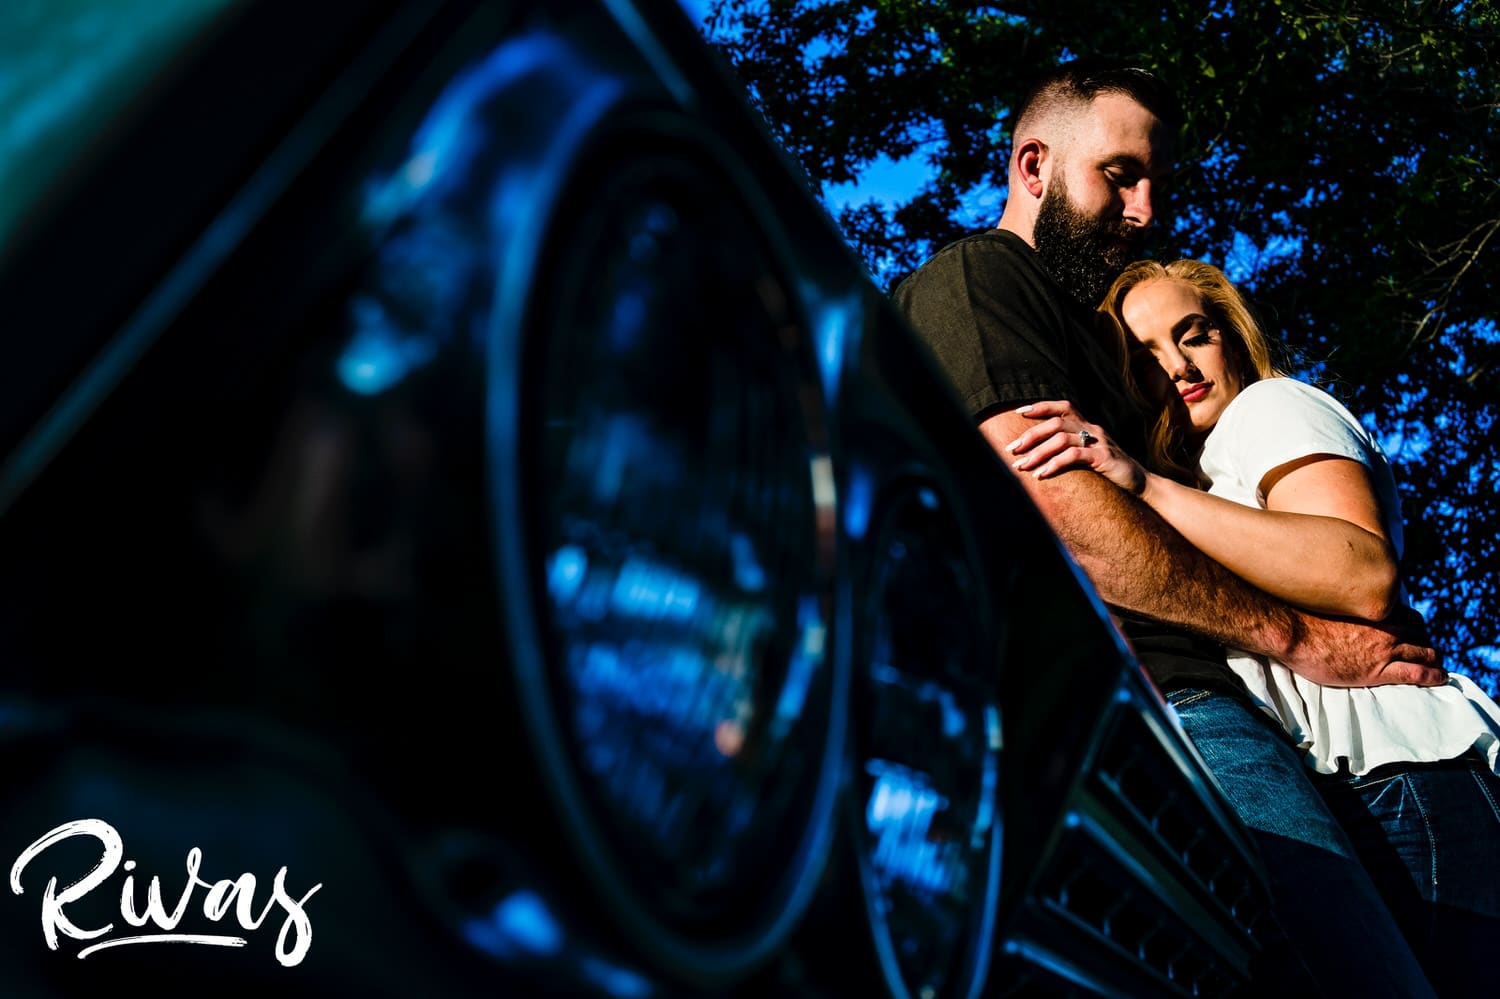 A vibrant portrait of an engaged couple sharing an intimate embrace as they lean up against the fender of an old Impala during their summer engagement session in Kansas City.